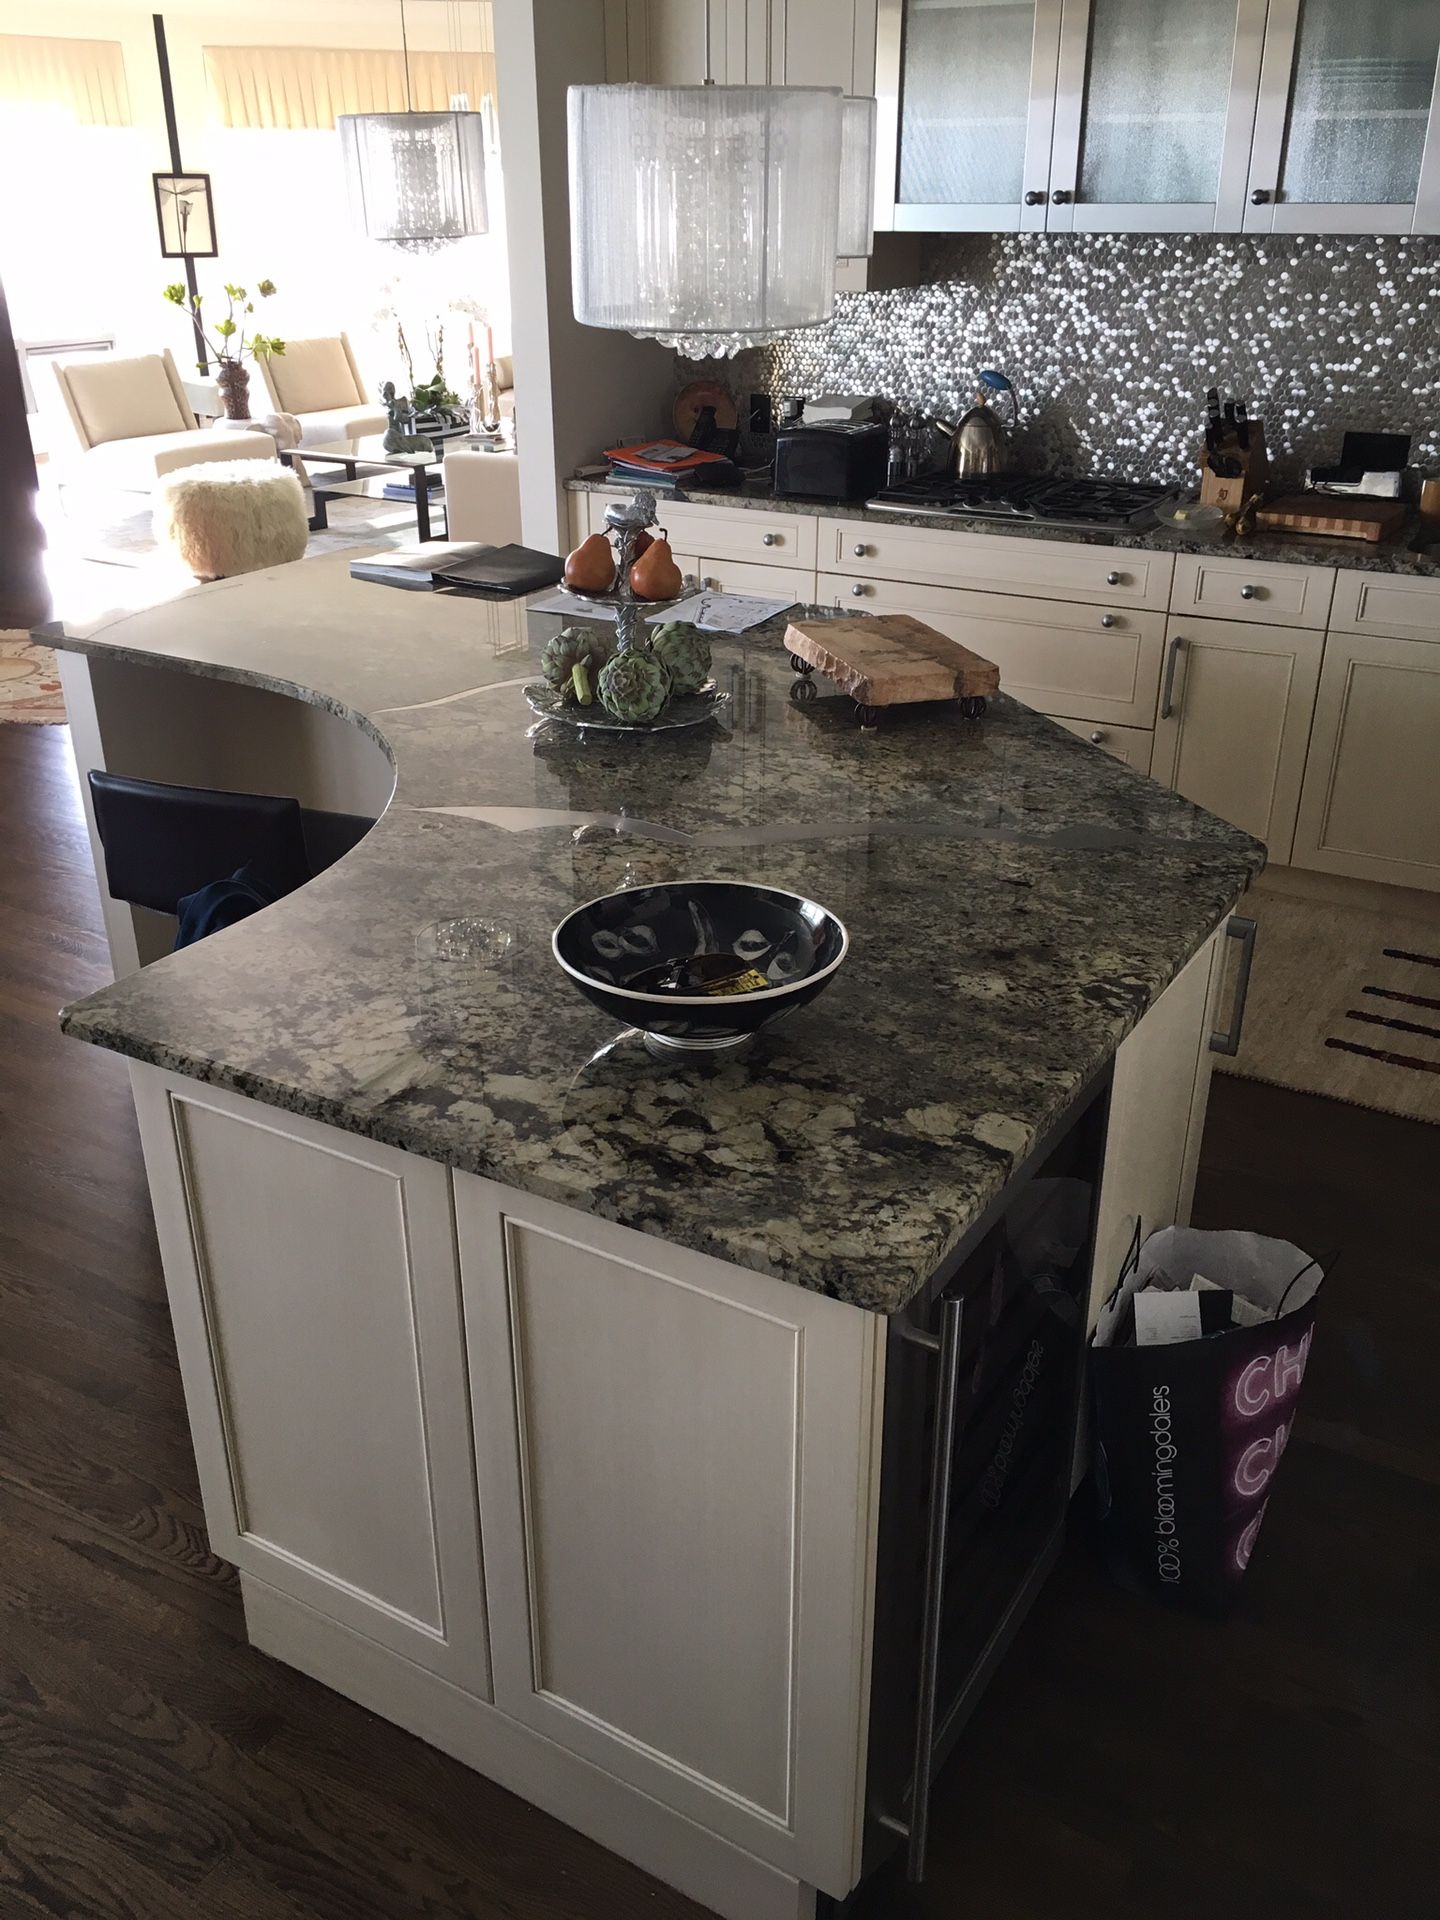 Kitchen cabinets and granite countertop, with metal inserts, and sink. Matching drop in cooktop(Thermador $850- sold separately)